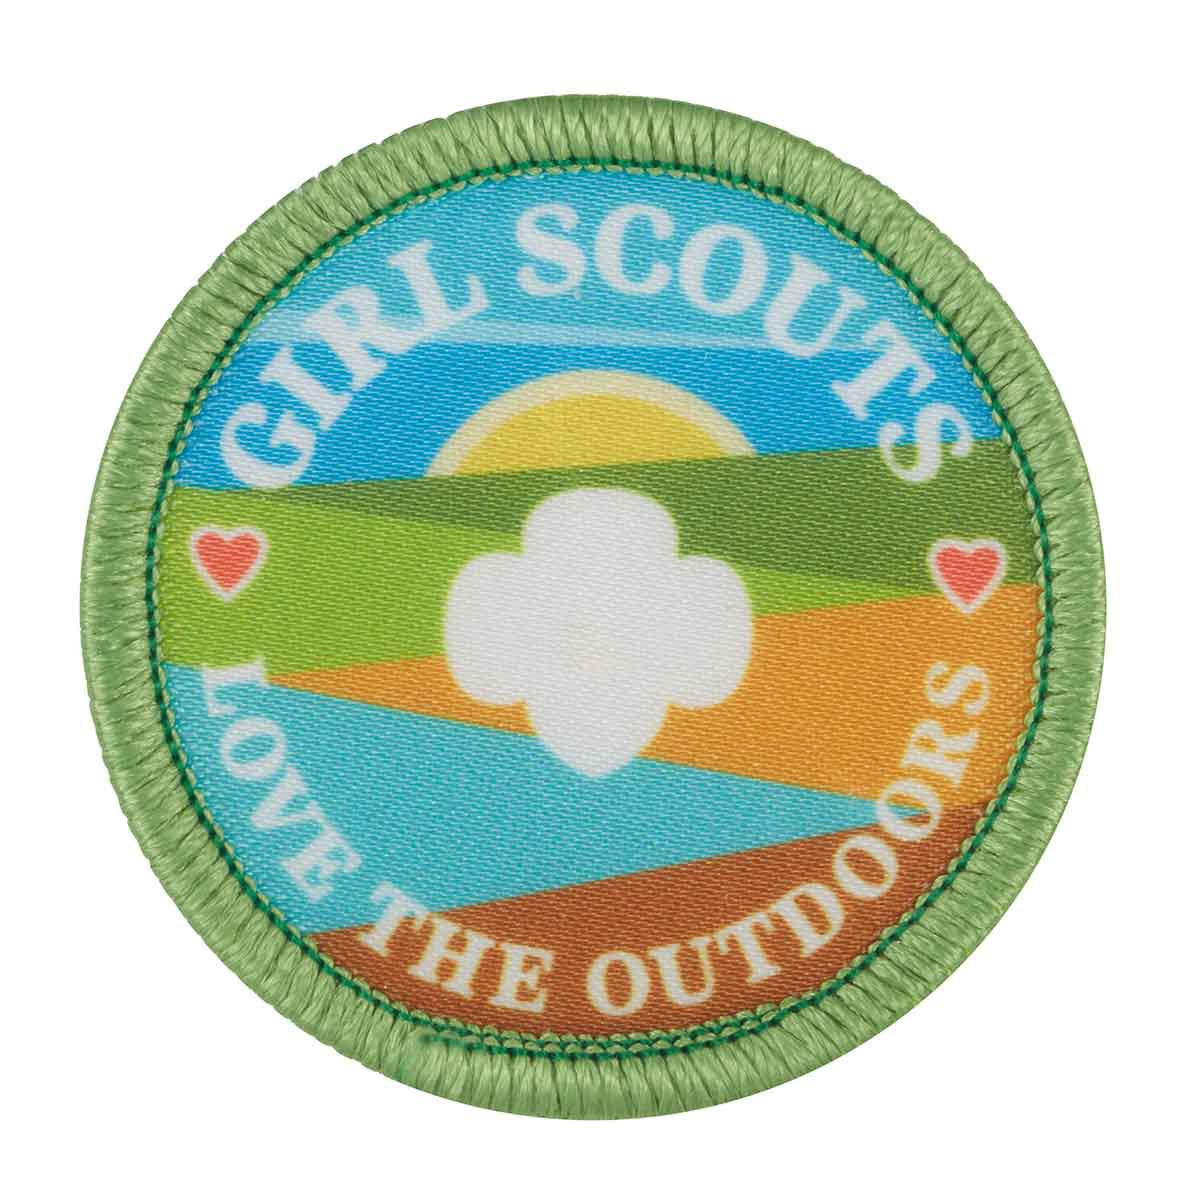 Outdoors Challenge Patch